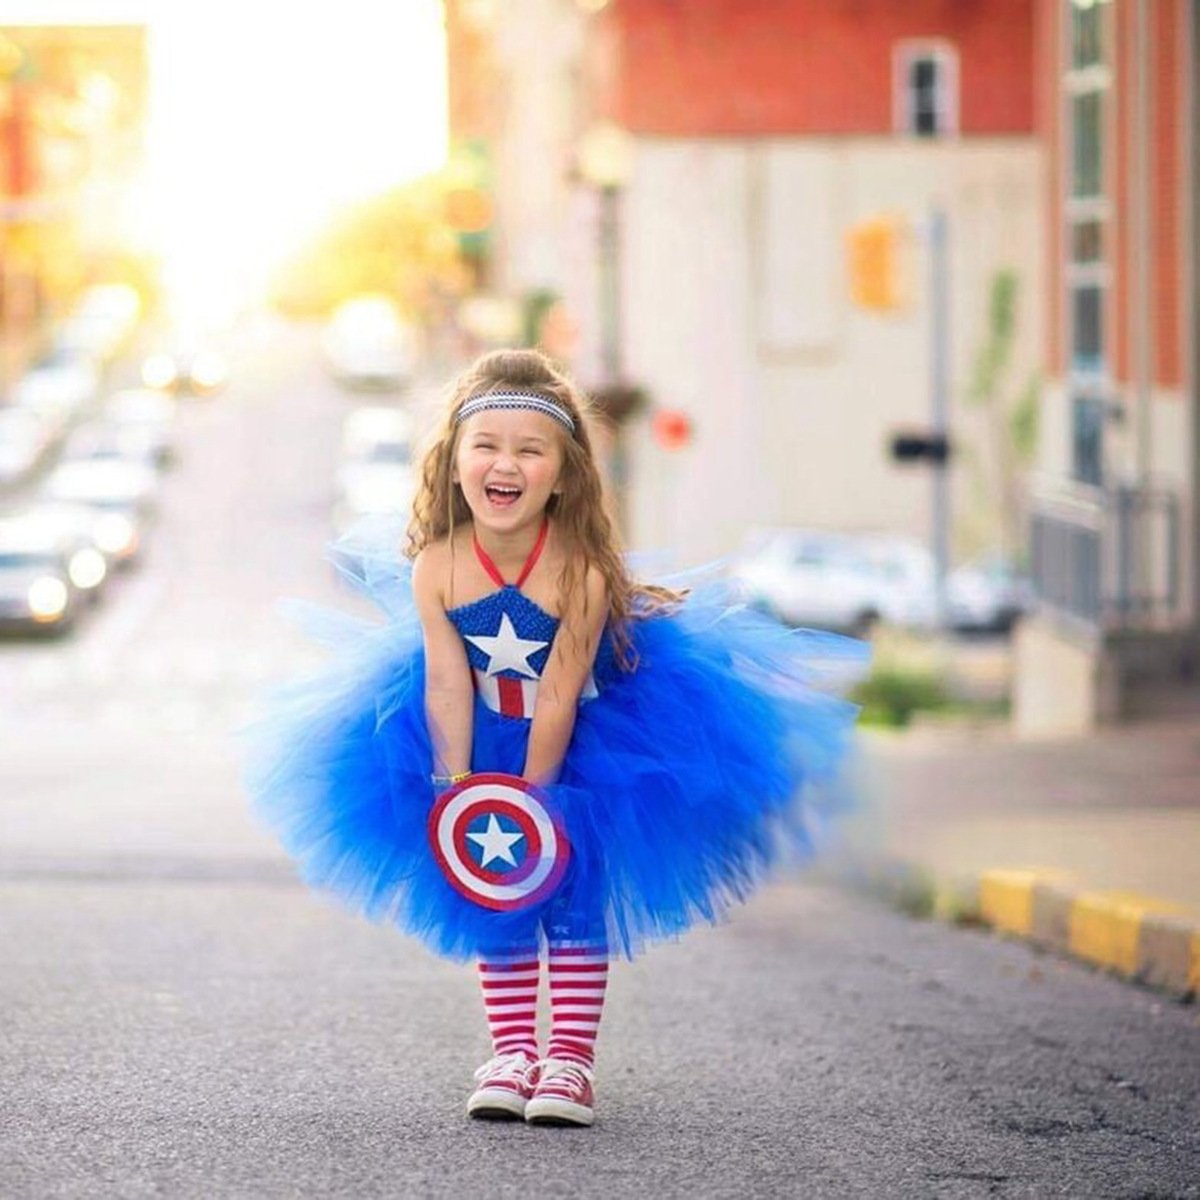 Baby Girl 4th of July Dress American Flag Tutu Dress with Socks for Independence Day Parade